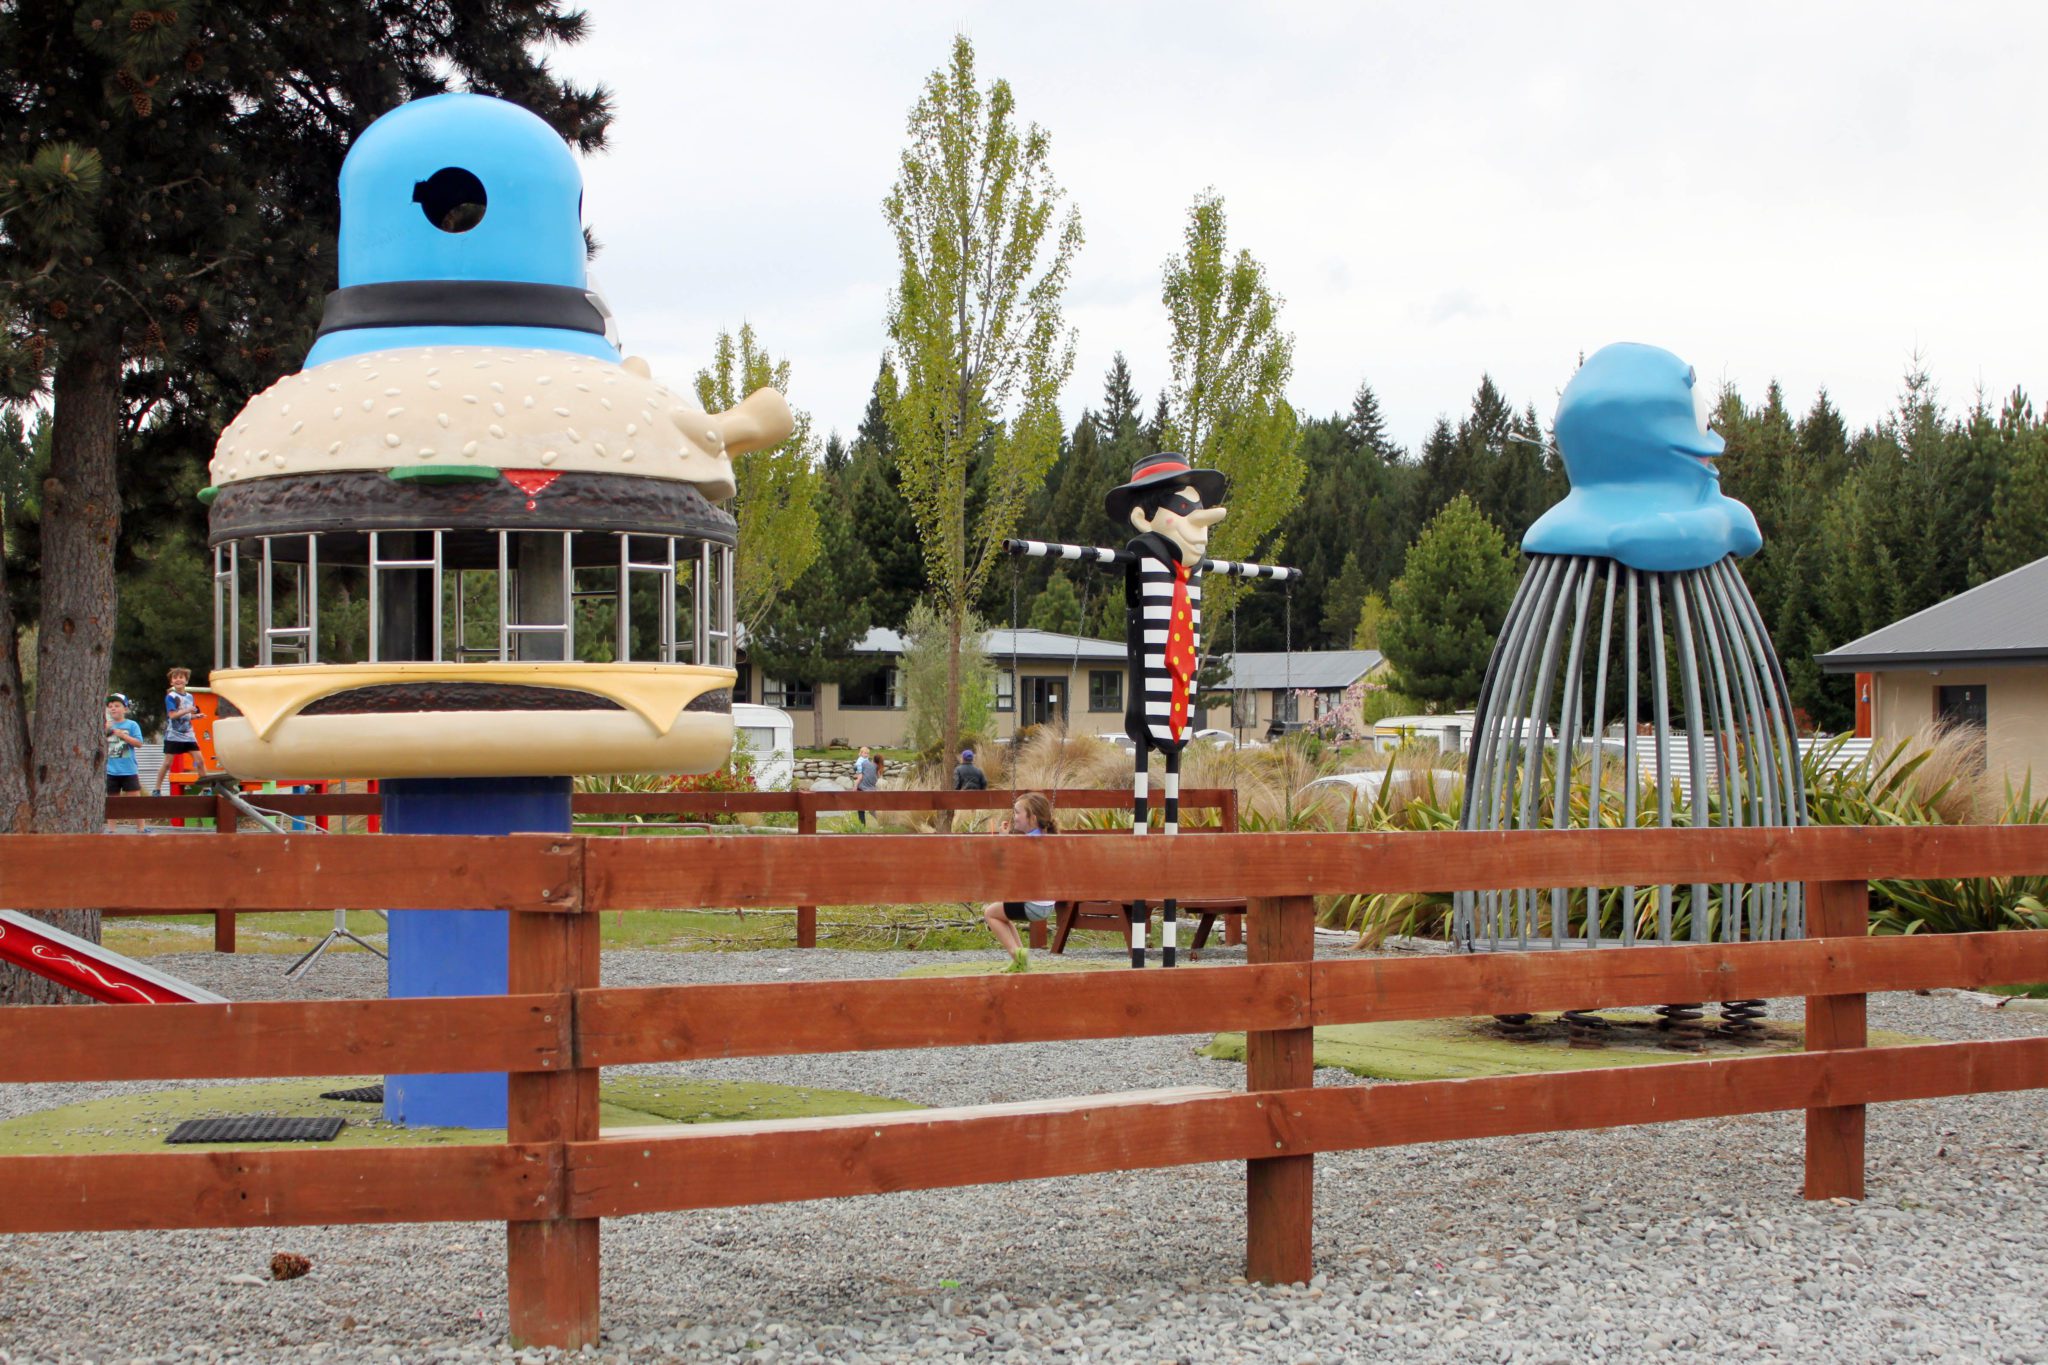 Discover the retired McDonald's play land at Lake Ruataniwha campground- Visit these 17 underrated spots on New Zealand's South Island- Where to go in New Zealand #newzealand #southisland #lakeruataniwha